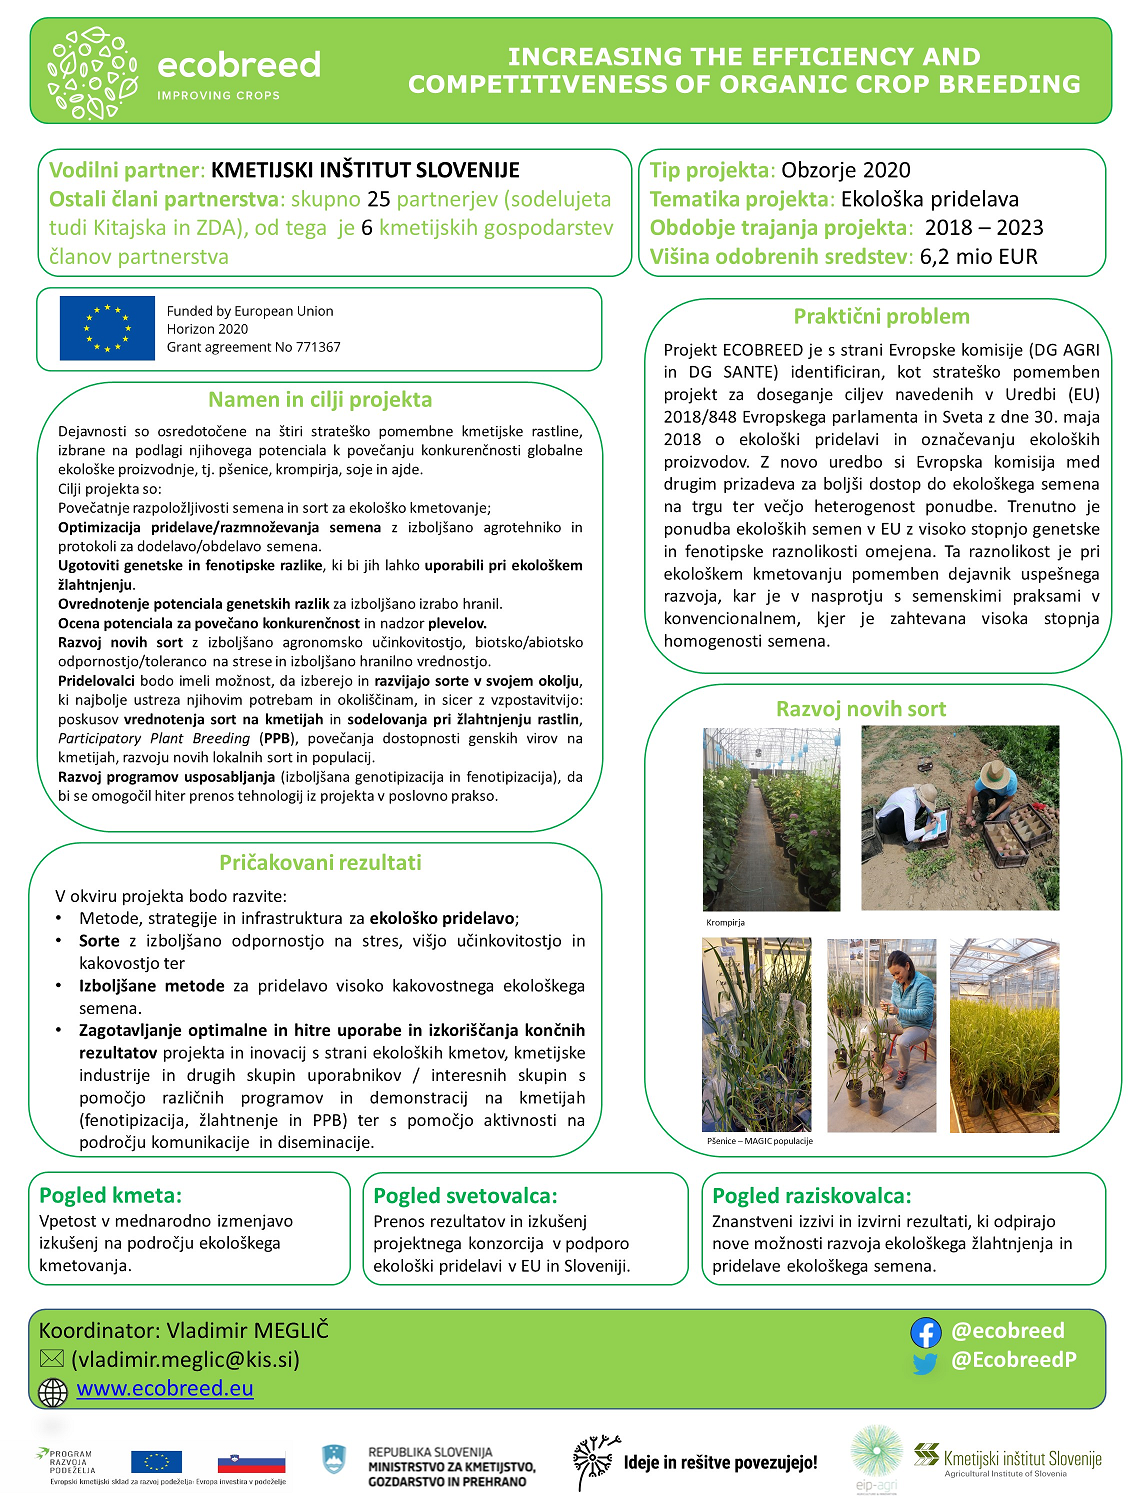 ECOBREED at the 35th Annual Conference of Slovene Agricultural Extension Services